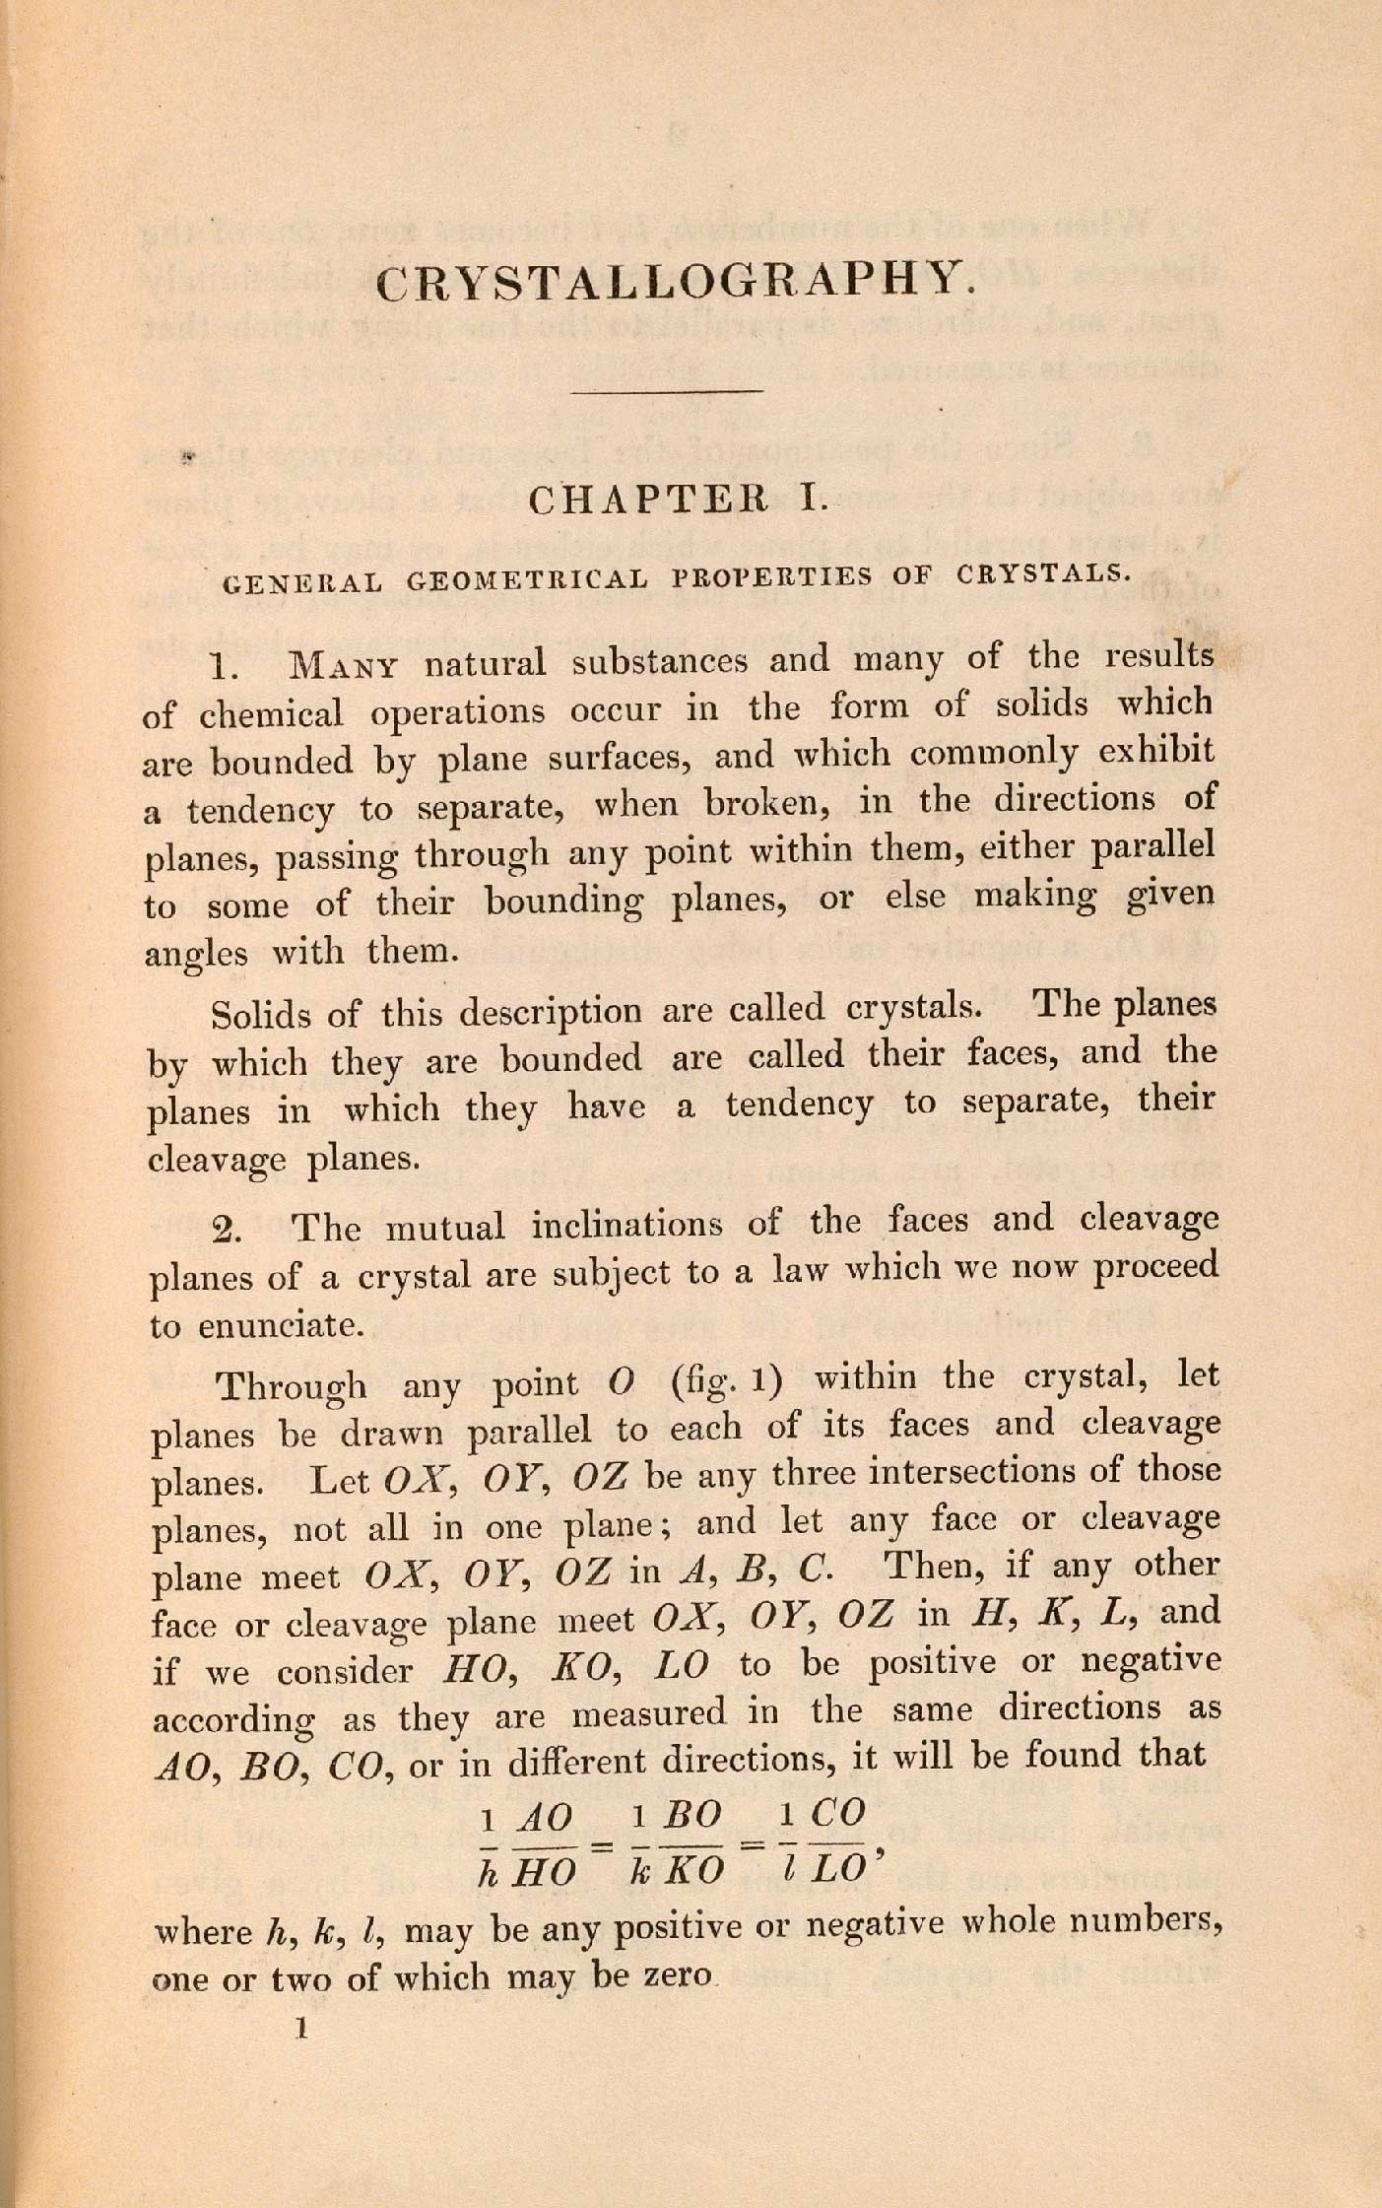 First page from WILLIAM MILLER (1801 - 1880). Treatise on Crystallography. Cambridge: For J. & J.J. Deighton, [etc.], 1839.